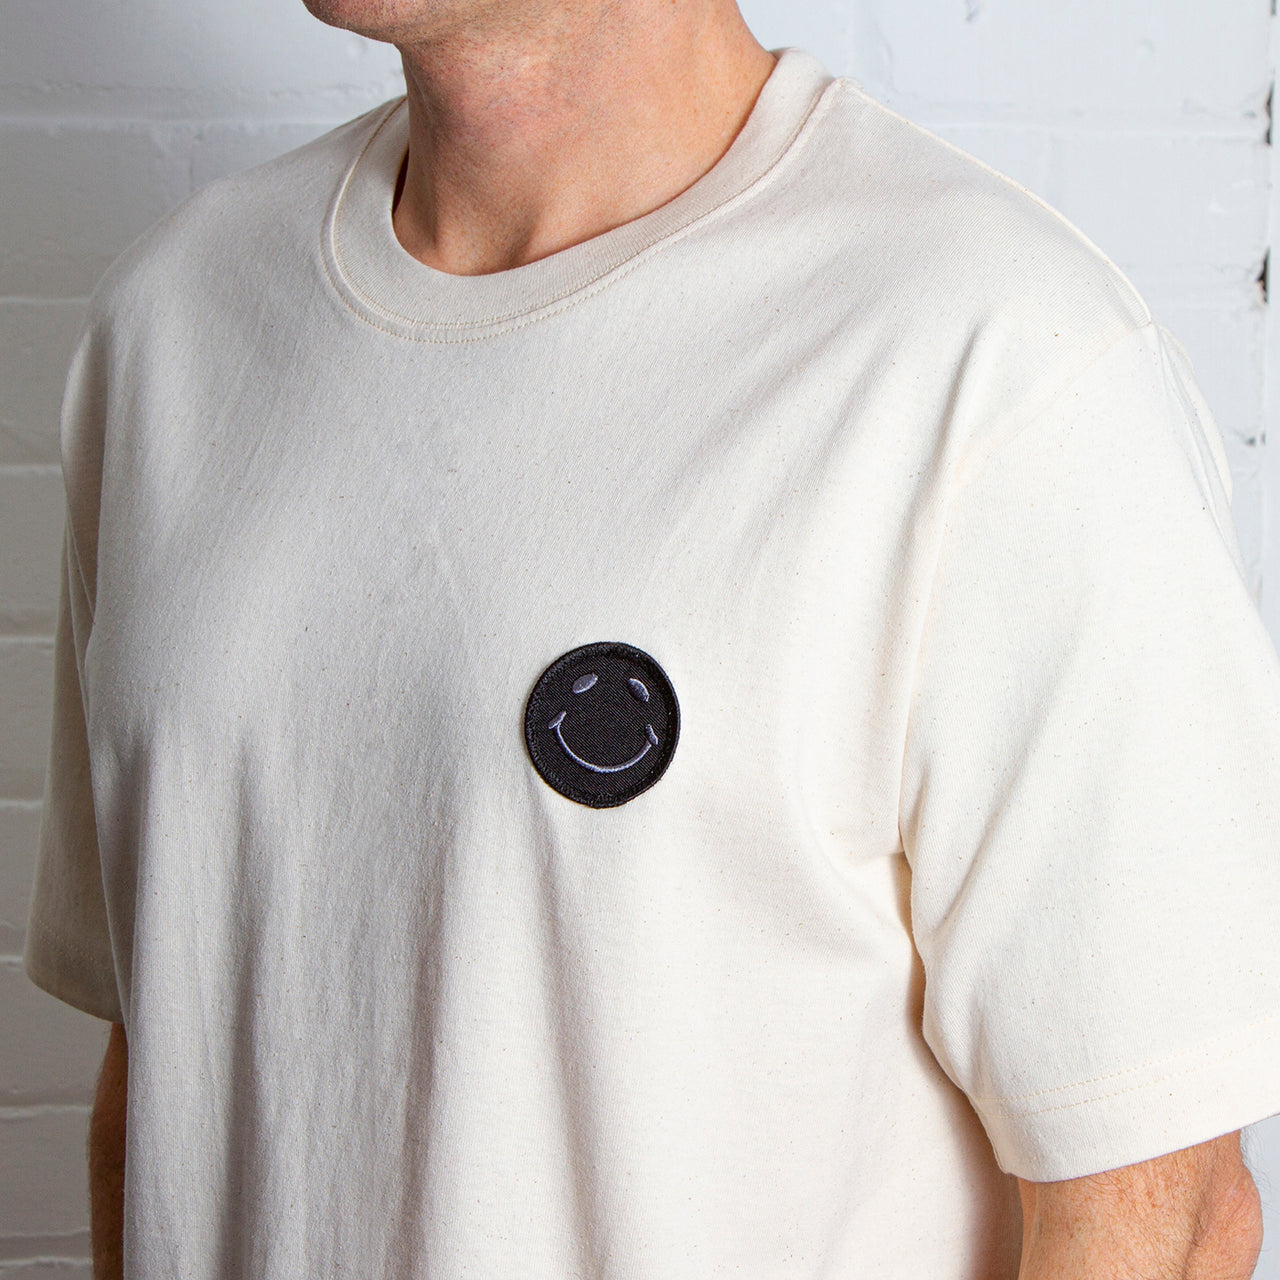 BB Smiley Crest  - Heavyweight Oversized Tshirt - Natural Raw